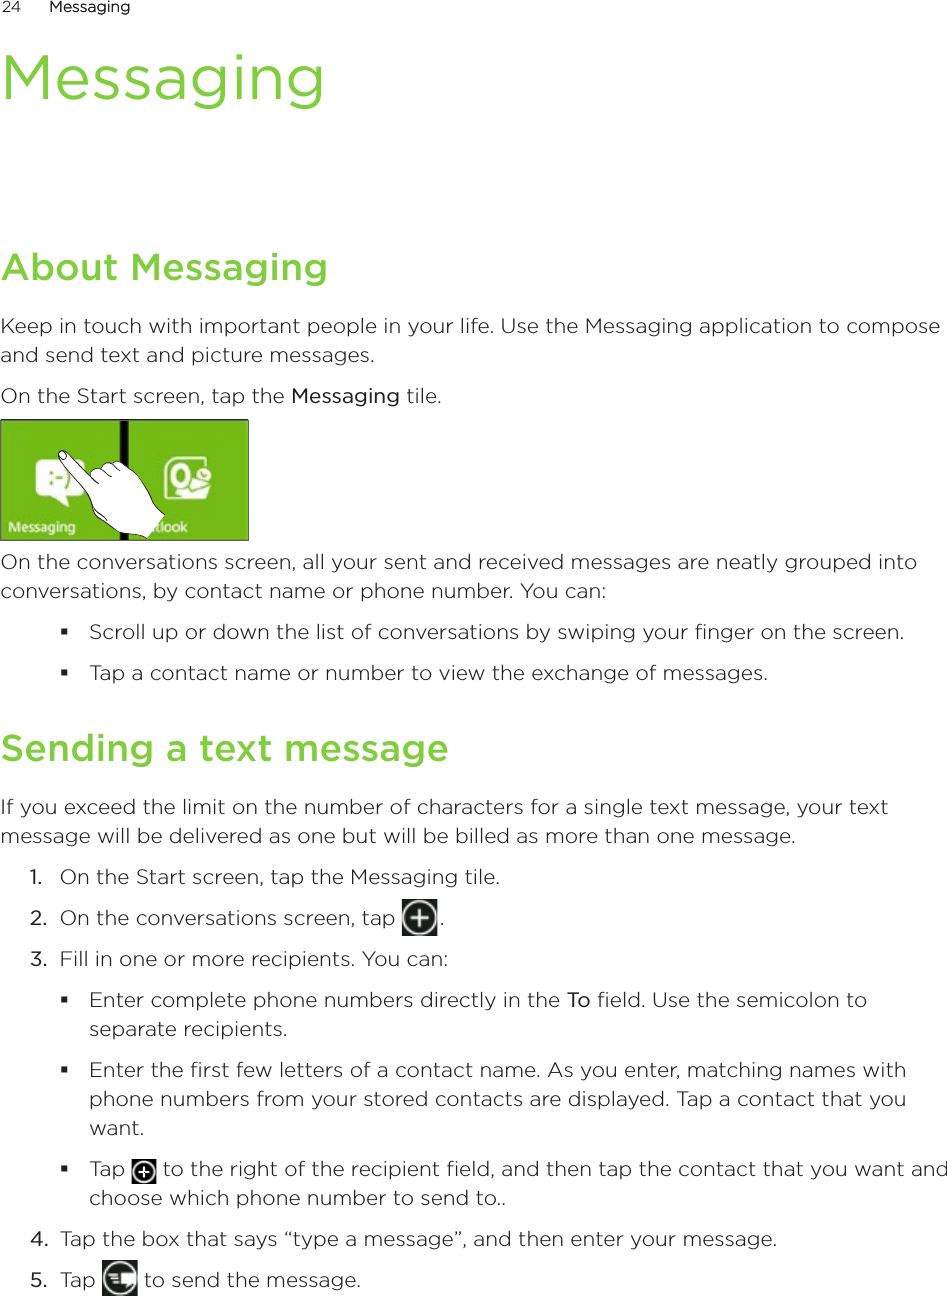 24      MessagingMessaging      MessagingAbout Messaging�eep in touch with important people in your life. Use the Messaging application to compose and send text and picture messages.On the Start screen, tap the Messaging tile.On the conversations screen, all your sent and received messages are neatly grouped into conversations, by contact name or phone number. You can:Scroll up or down the list of conversations by swiping your finger on the screen.Tap a contact name or number to view the exchange of messages.Sending a text messageIf you exceed the limit on the number of characters for a single text message, your text message will be delivered as one but will be billed as more than one message. On the Start screen, tap the Messaging tile.On the conversations screen, tap   . 3.  Fill in one or more recipients. You can:Enter complete phone numbers directly in the To field. Use the semicolon to separate recipients.Enter the first few letters of a contact name. As you enter, matching names with phone numbers from your stored contacts are displayed. Tap a contact that you want.Tap   to the right of the recipient field, and then tap the contact that you want and choose which phone number to send to..4.  Tap the box that says “type a message”, and then enter your message.5.  Tap   to send the message.1.2.